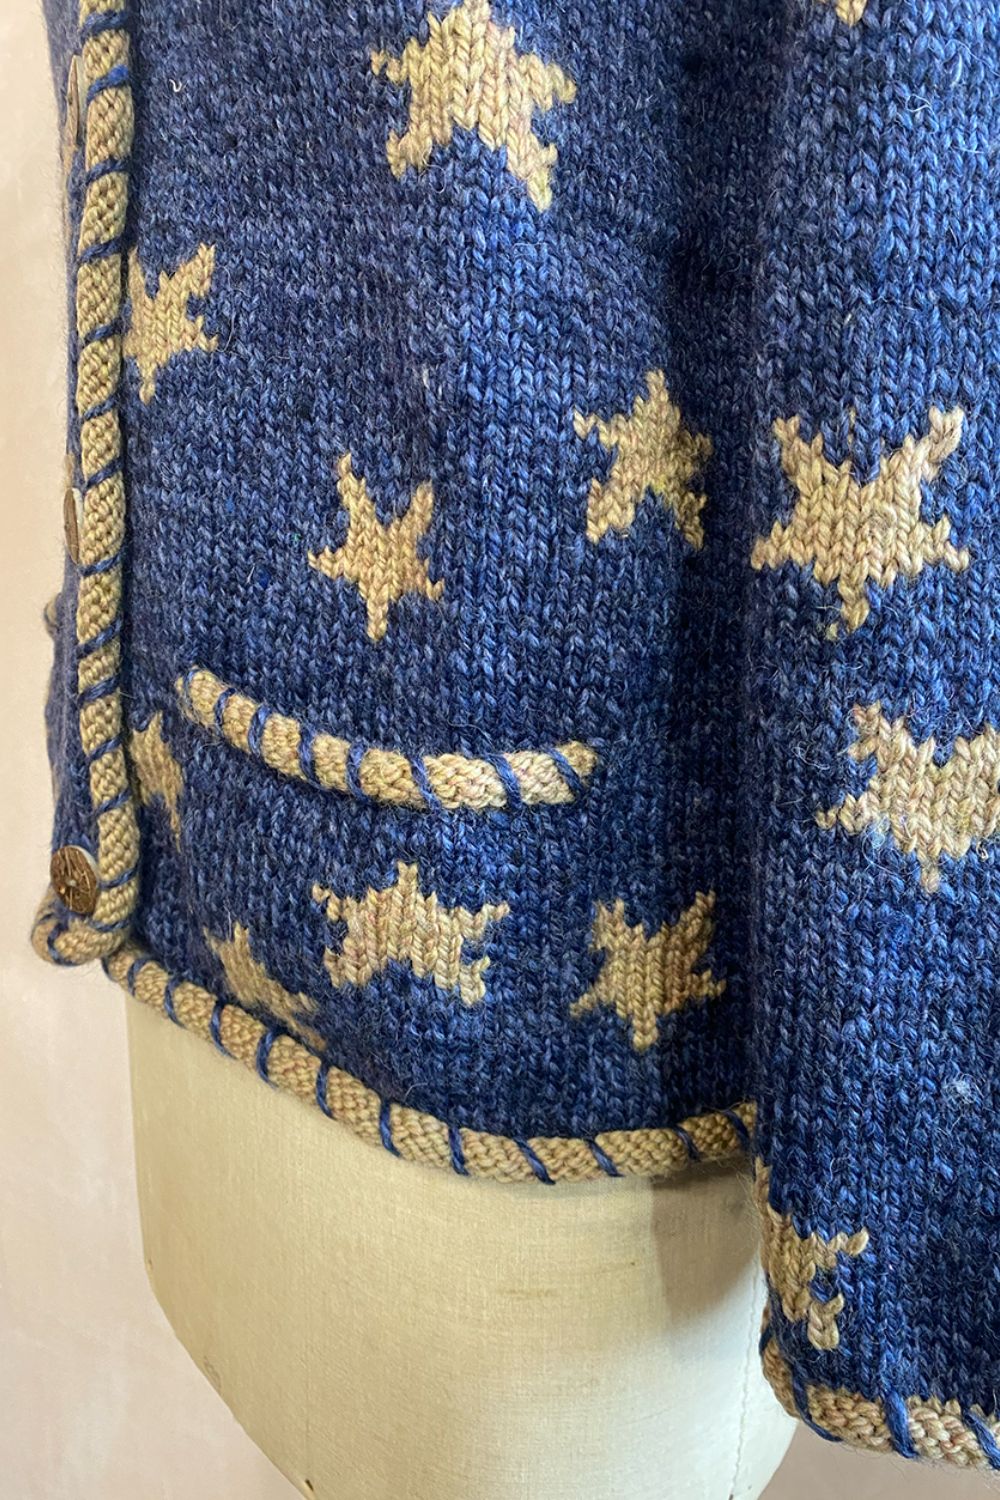 Detail of Star Cardigan pocket and button